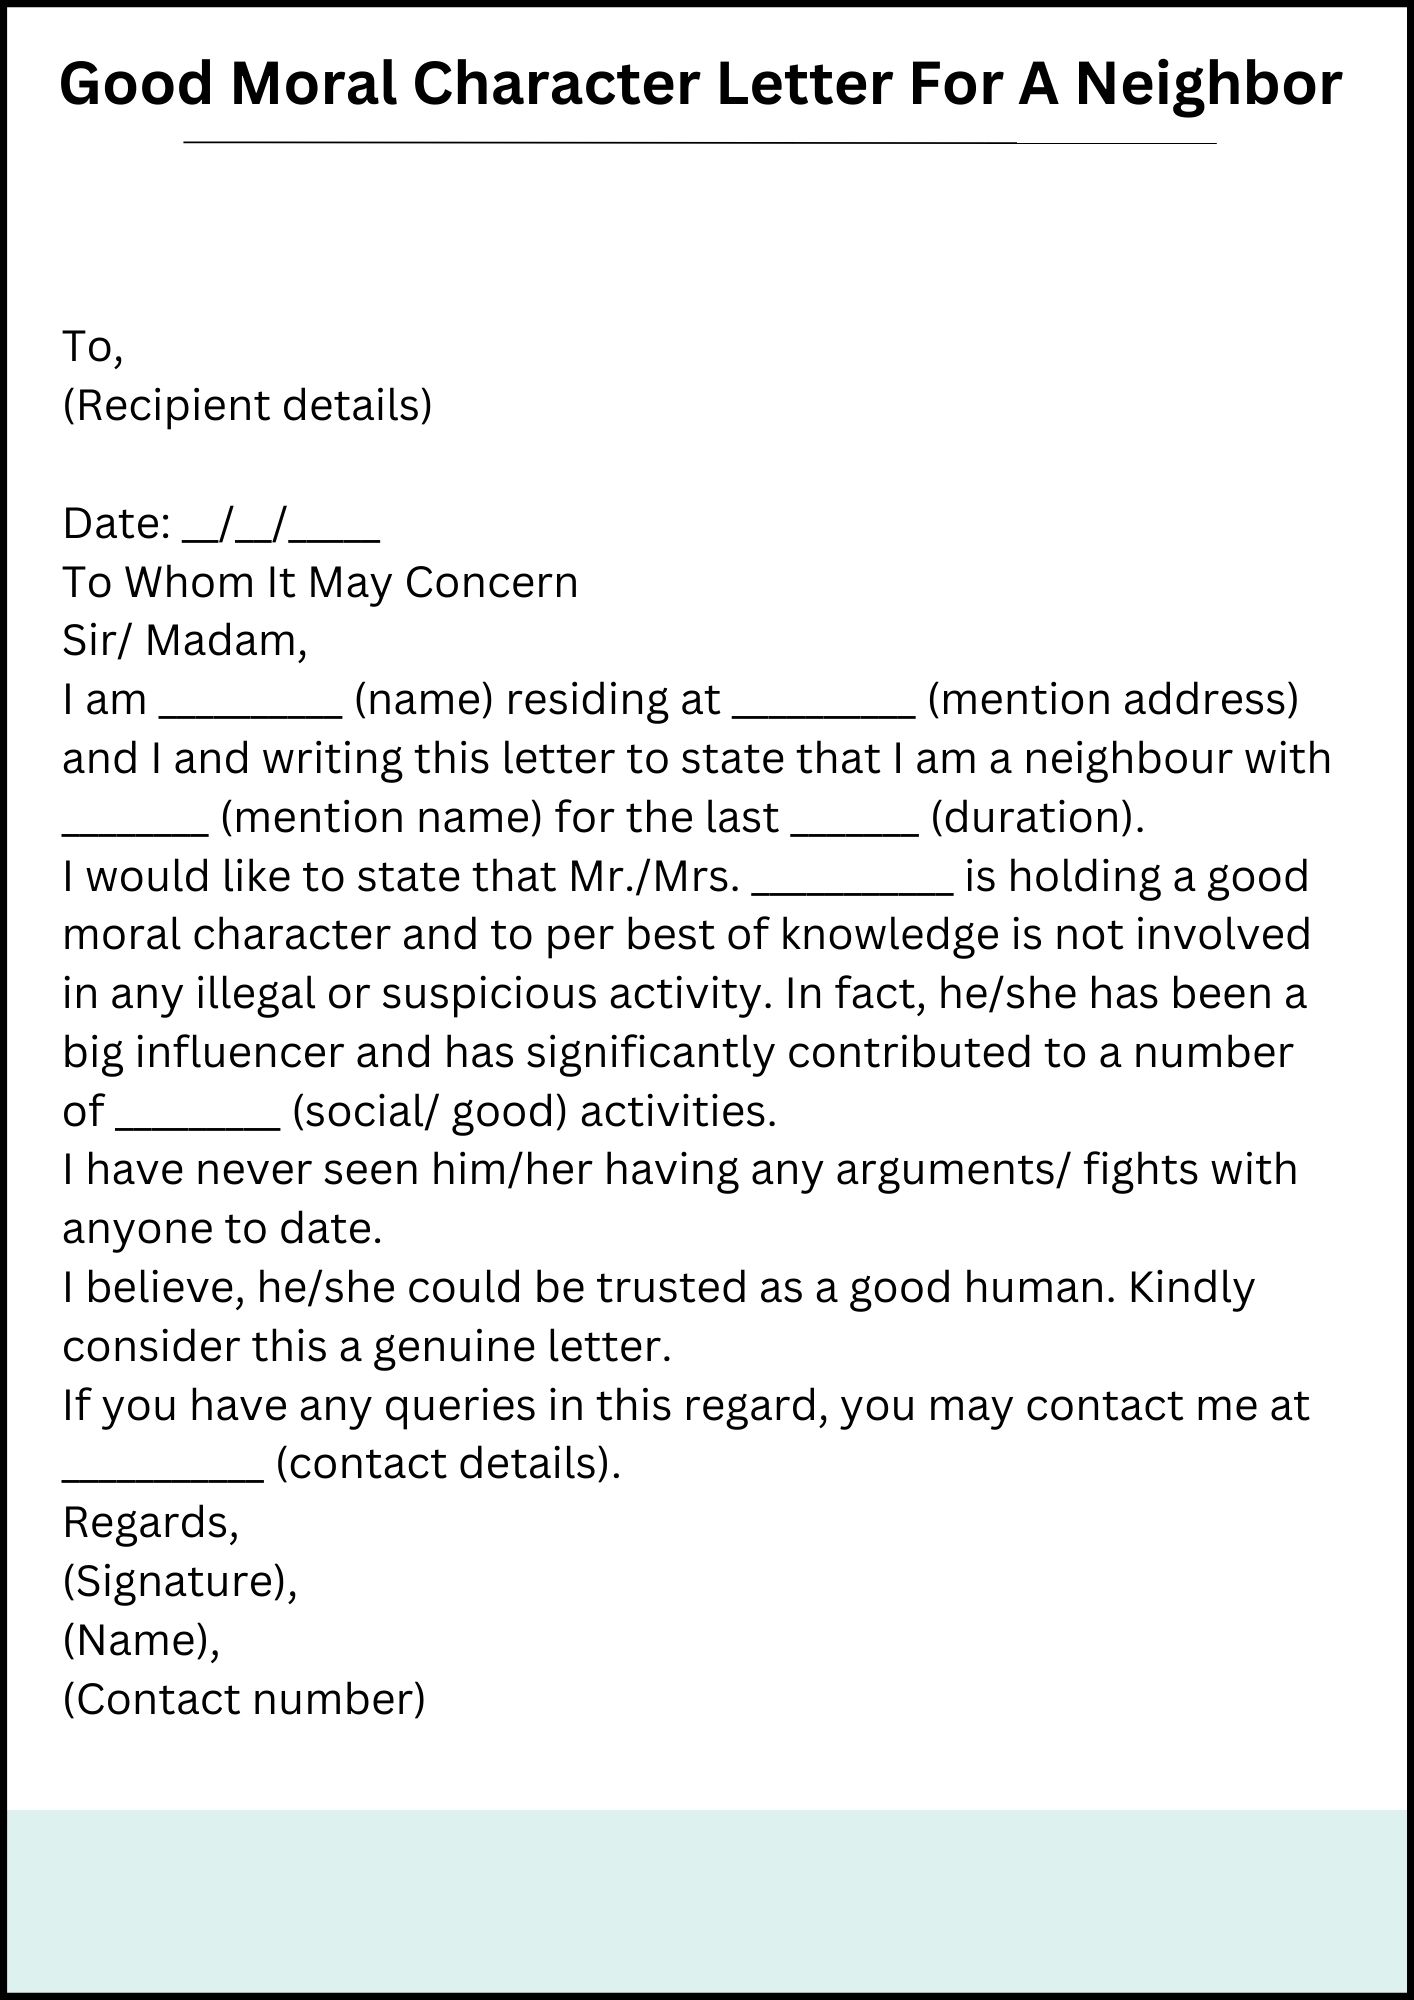 Good Moral Character Letter For A Neighbor 